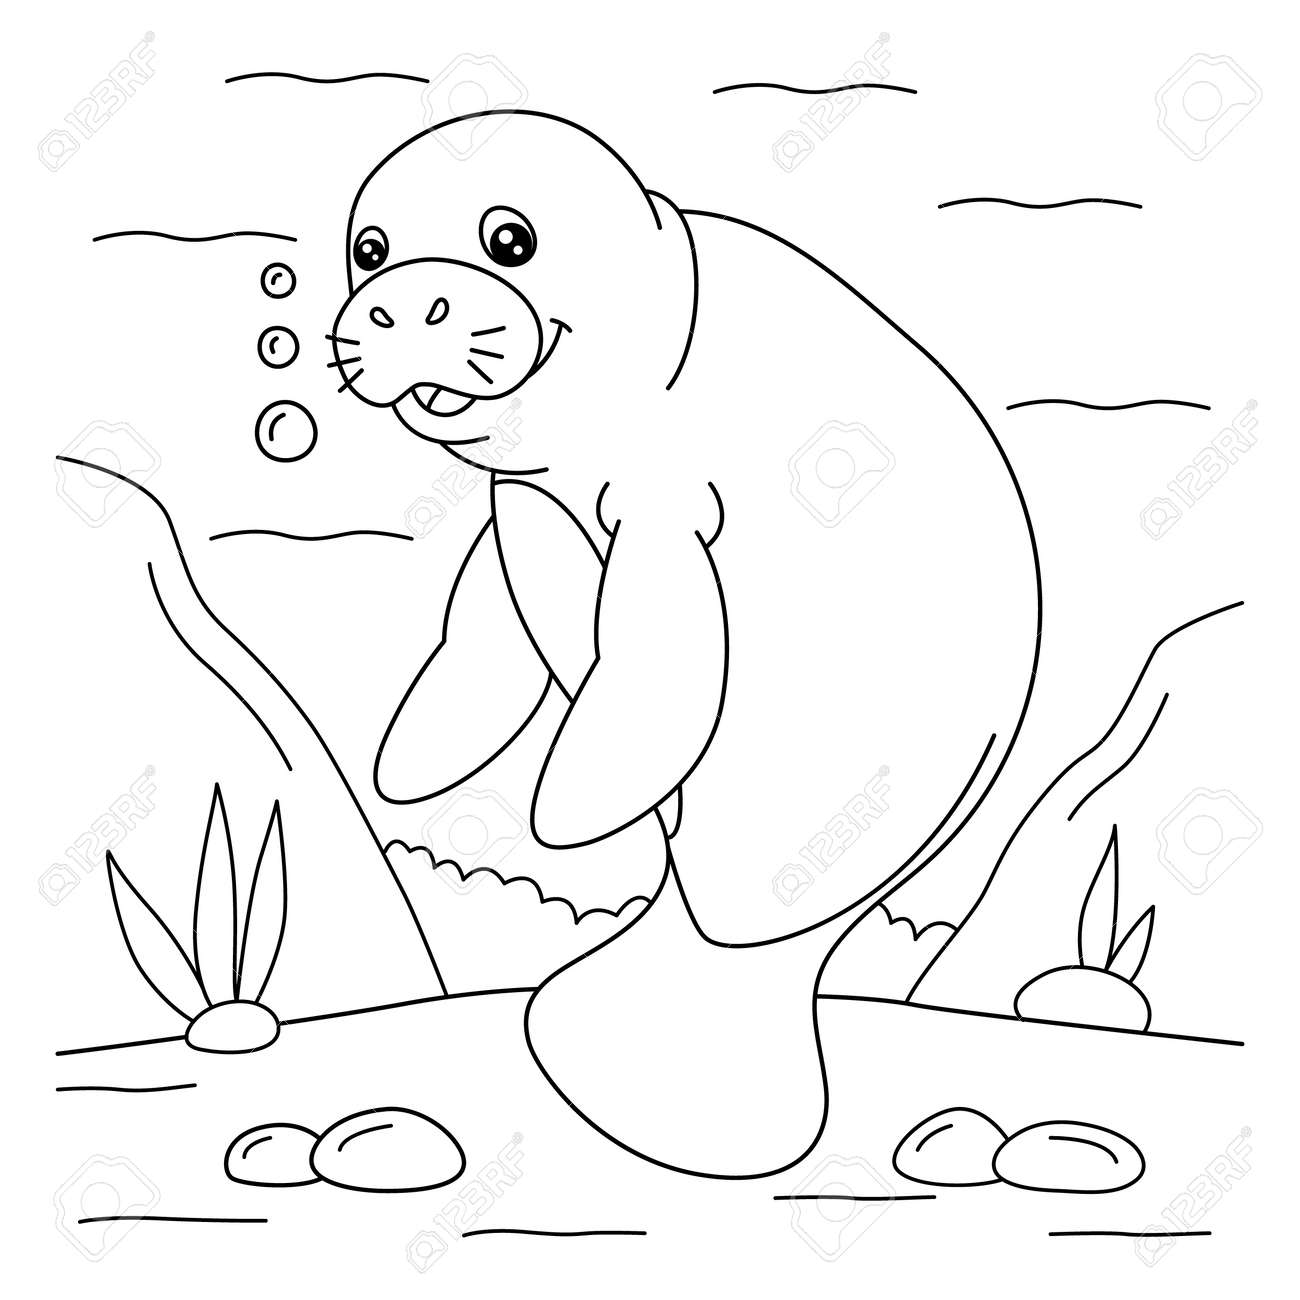 Manatee coloring page for kids royalty free svg cliparts vectors and stock illustration image